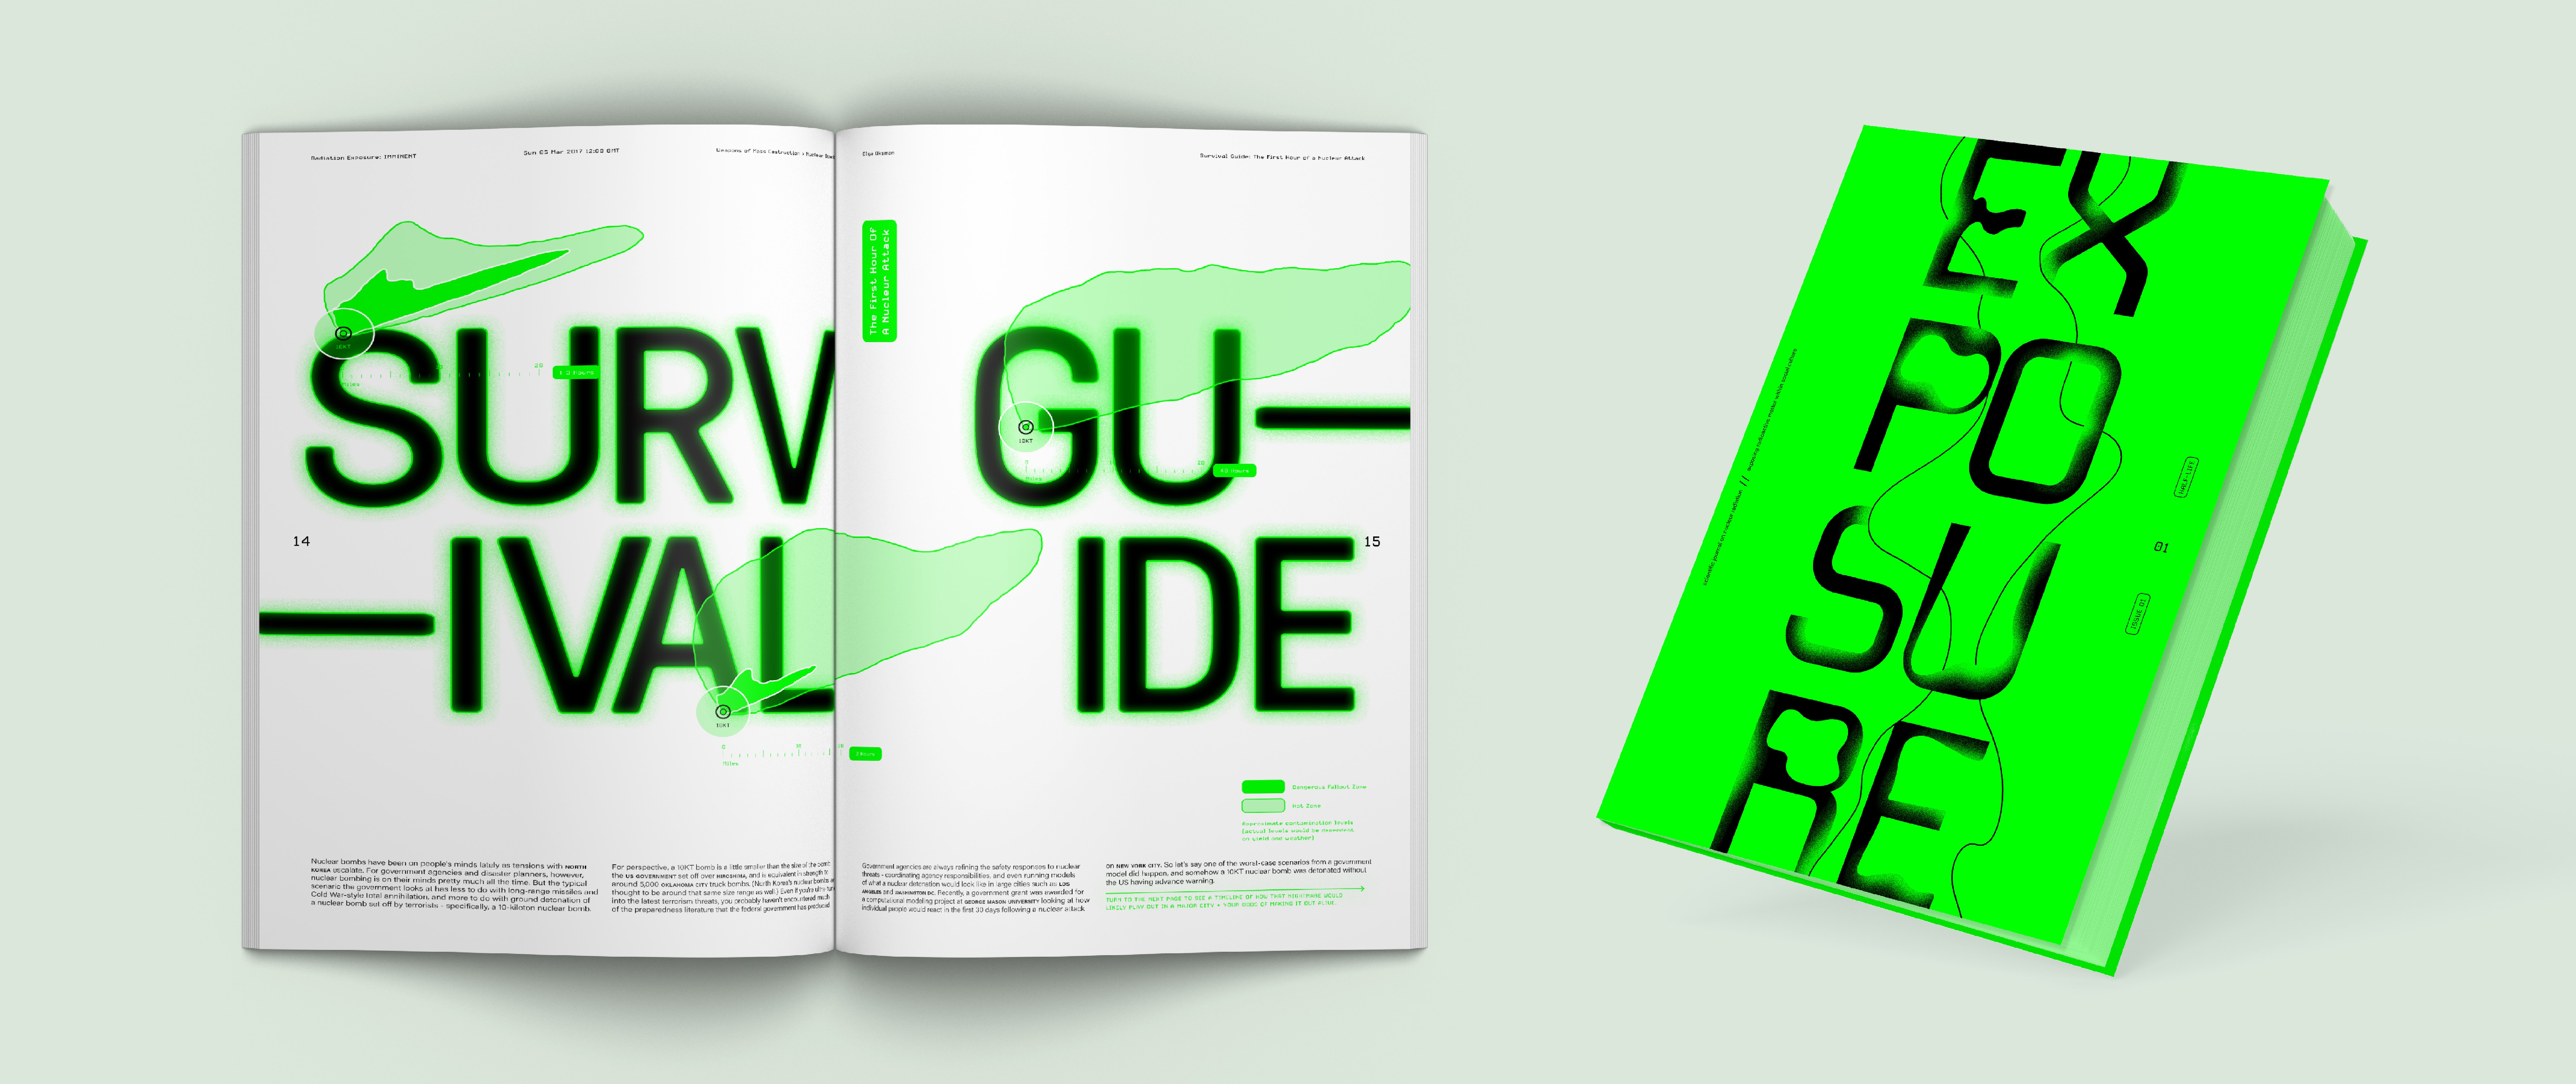 BA Design for Publishing work by Rebecca Hills, showing the magazine cover design and editorial page spread using a striking combination of neon green and black inks.